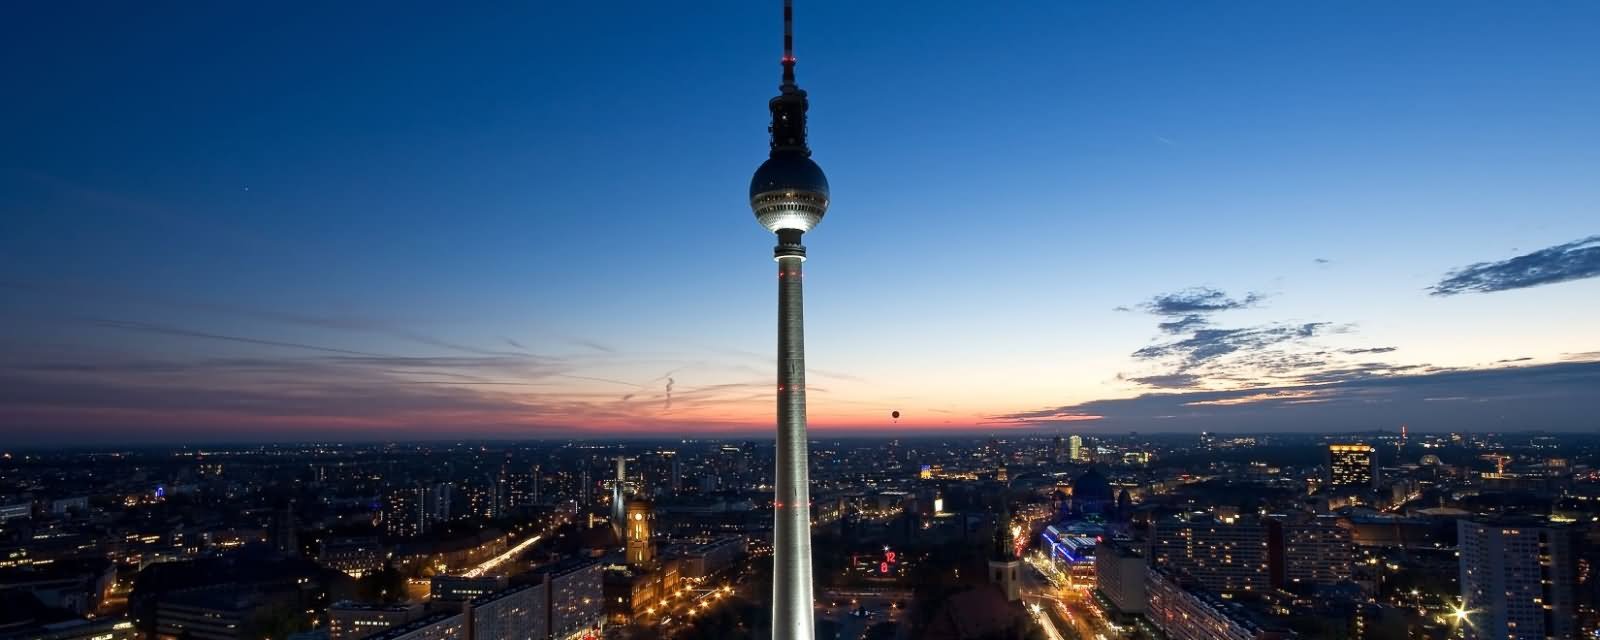 Panorama View Of The Fernsehturm At Dusk In Berlin